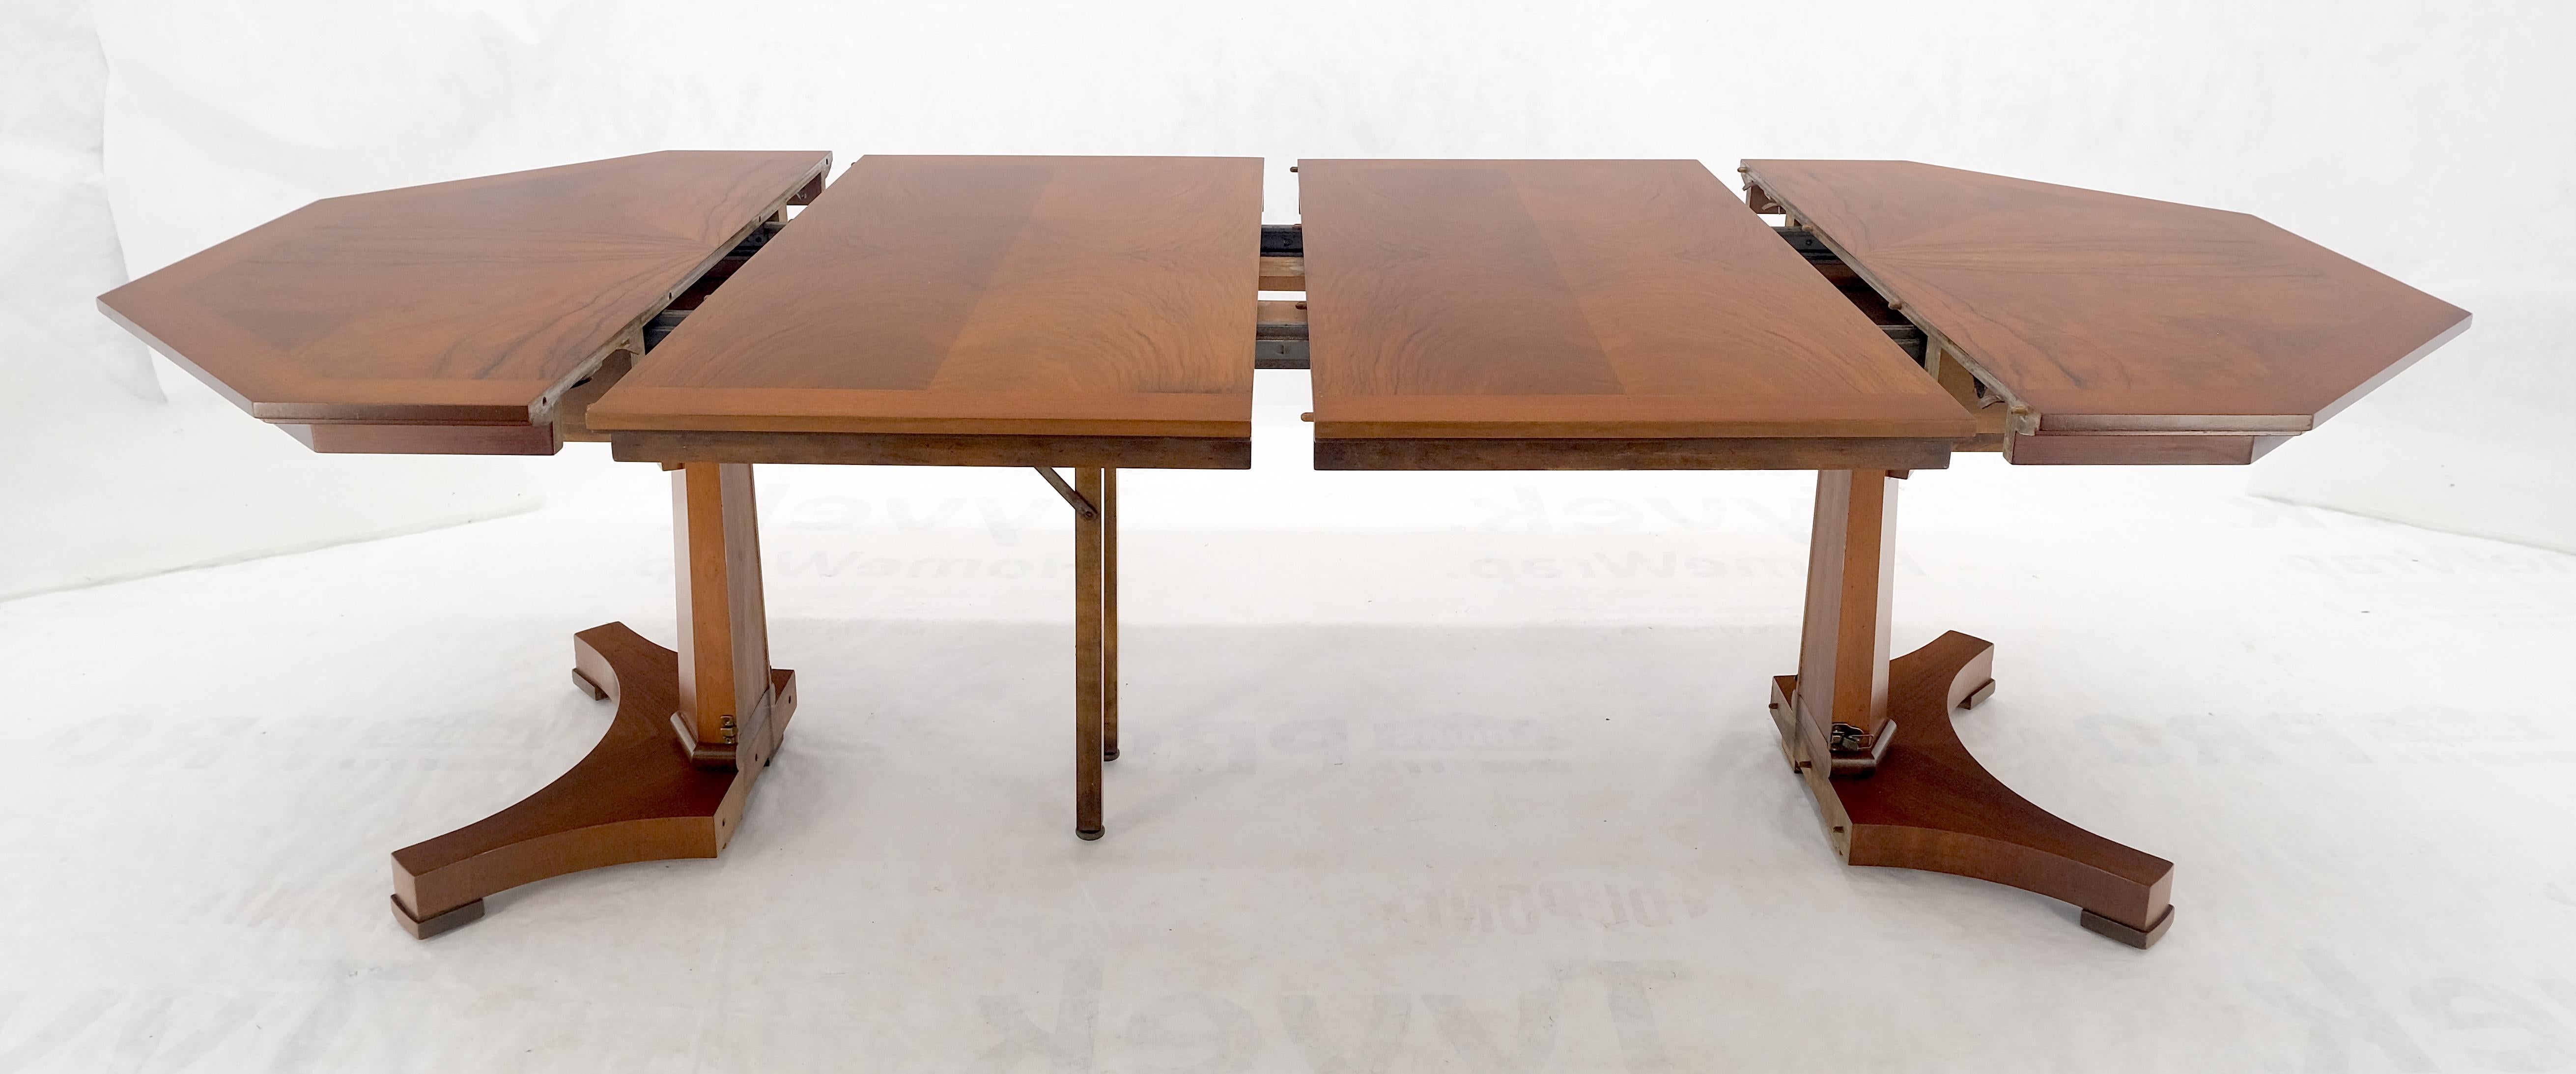 Baker LIght Walnut Round Octagon Single Base Two Leaves Dining Room Table Mint! For Sale 2